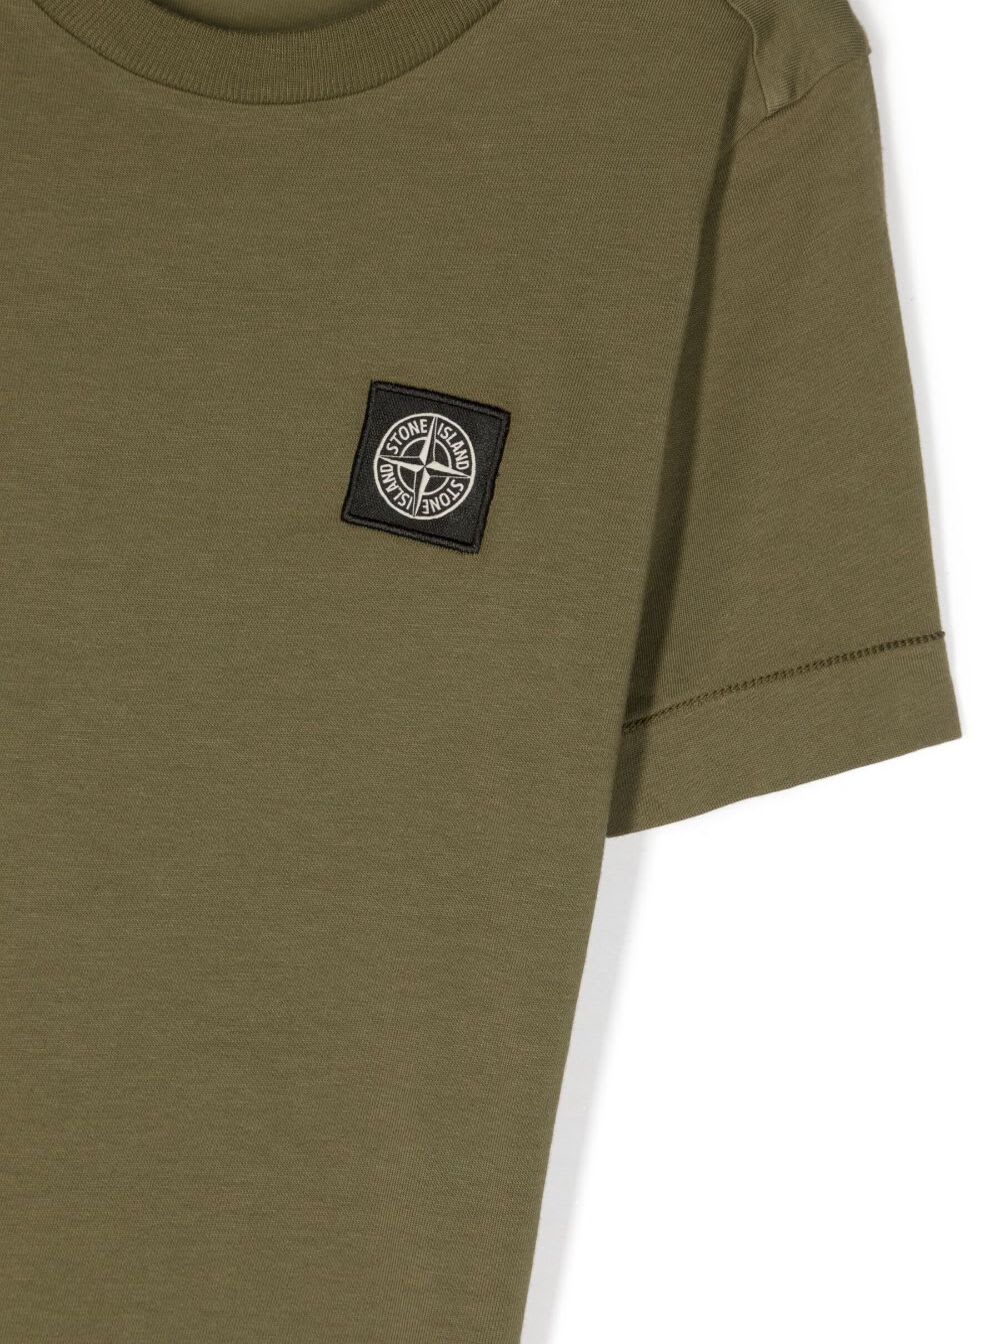 Shop Stone Island Junior Green Crewneck Short-sleeved T-shirt And Contrasting Patch Logo In Cotton Boy